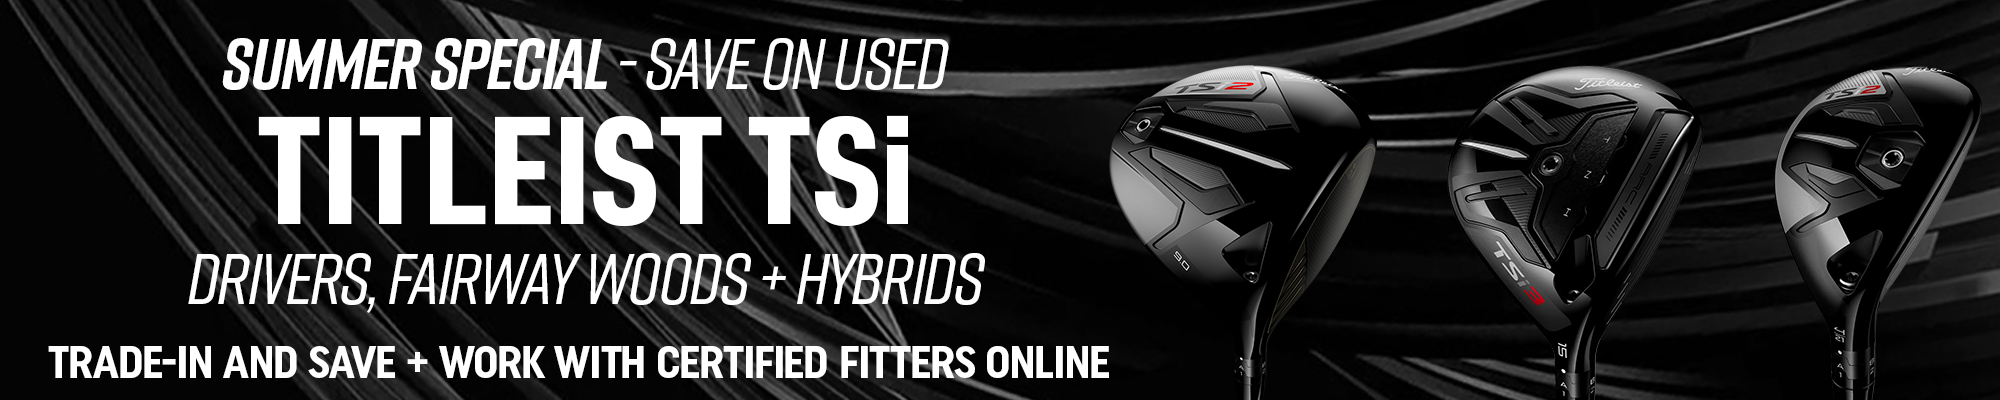 Summer Special - Save on Used Titleist TSi Drivers, Fairway Woods + Hybrids | Trade-In and Save - Work with certified fitters online